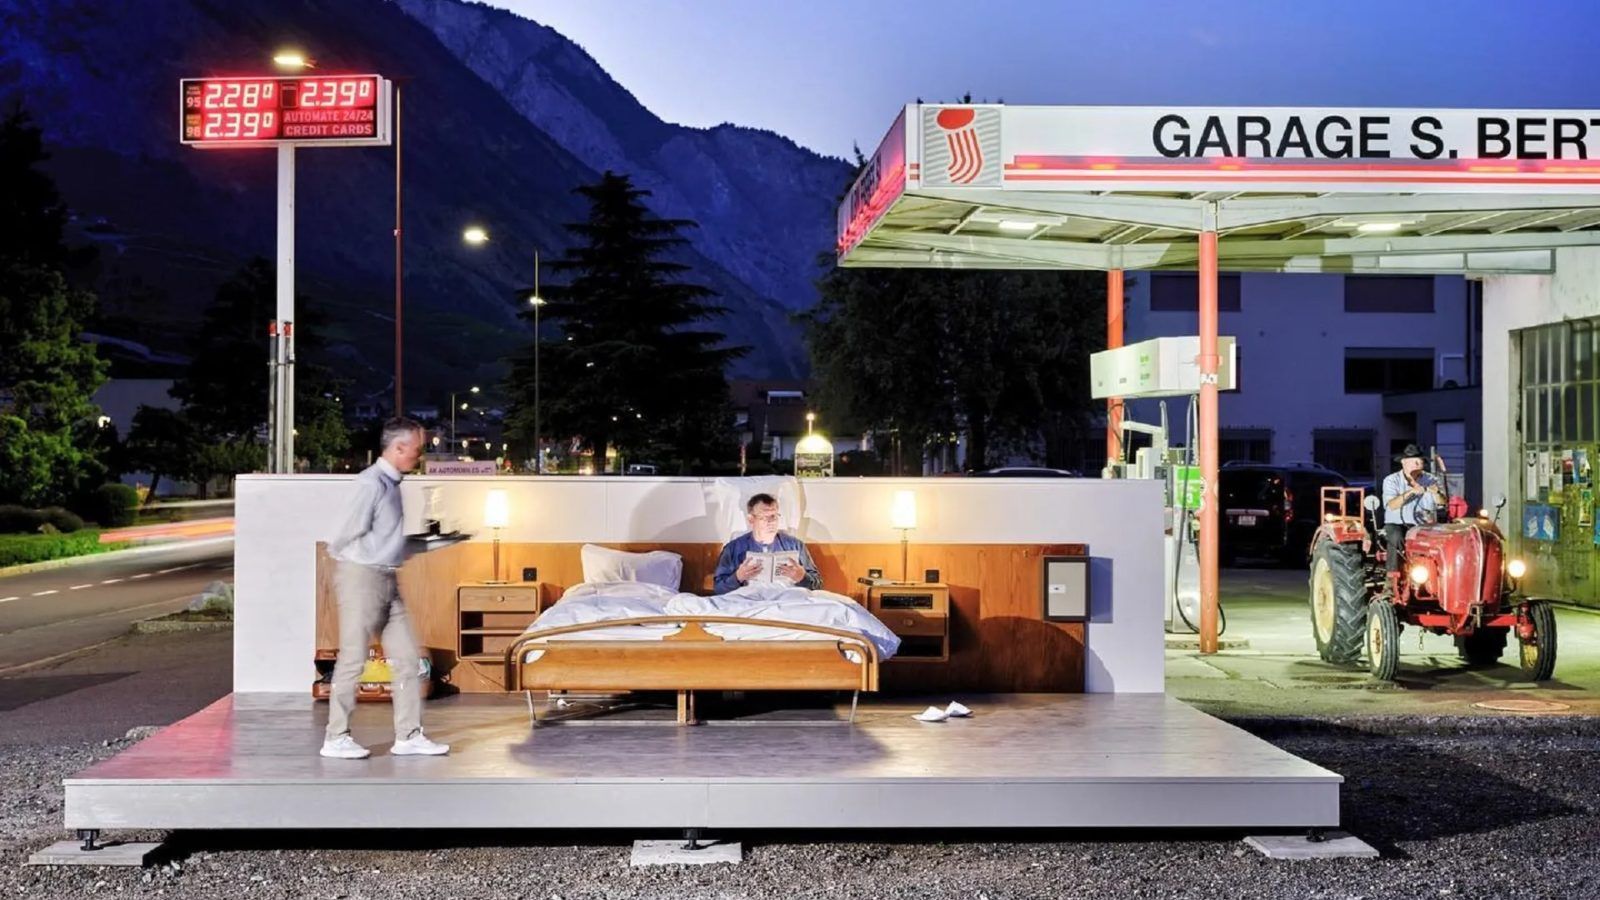 Swiss brothers create ‘zero star hotel’ project for guests to ponder over world’s crises